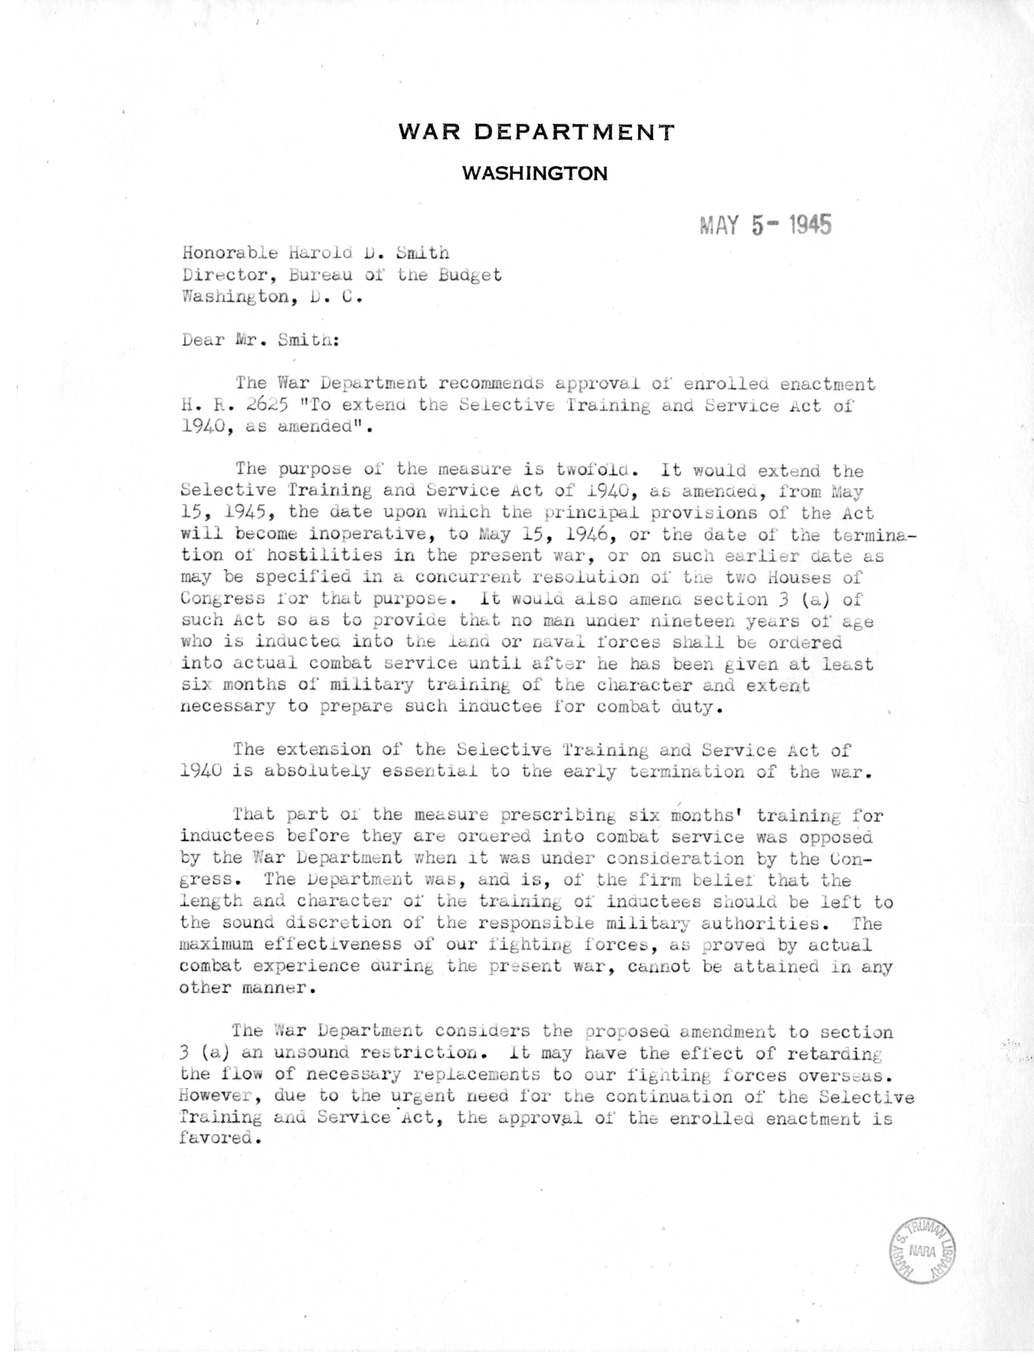 Memorandum from Harold D. Smith to M. C. Latta, H.R. 2625, Extend the Selective Training and Service Act of 1940, with Attachments